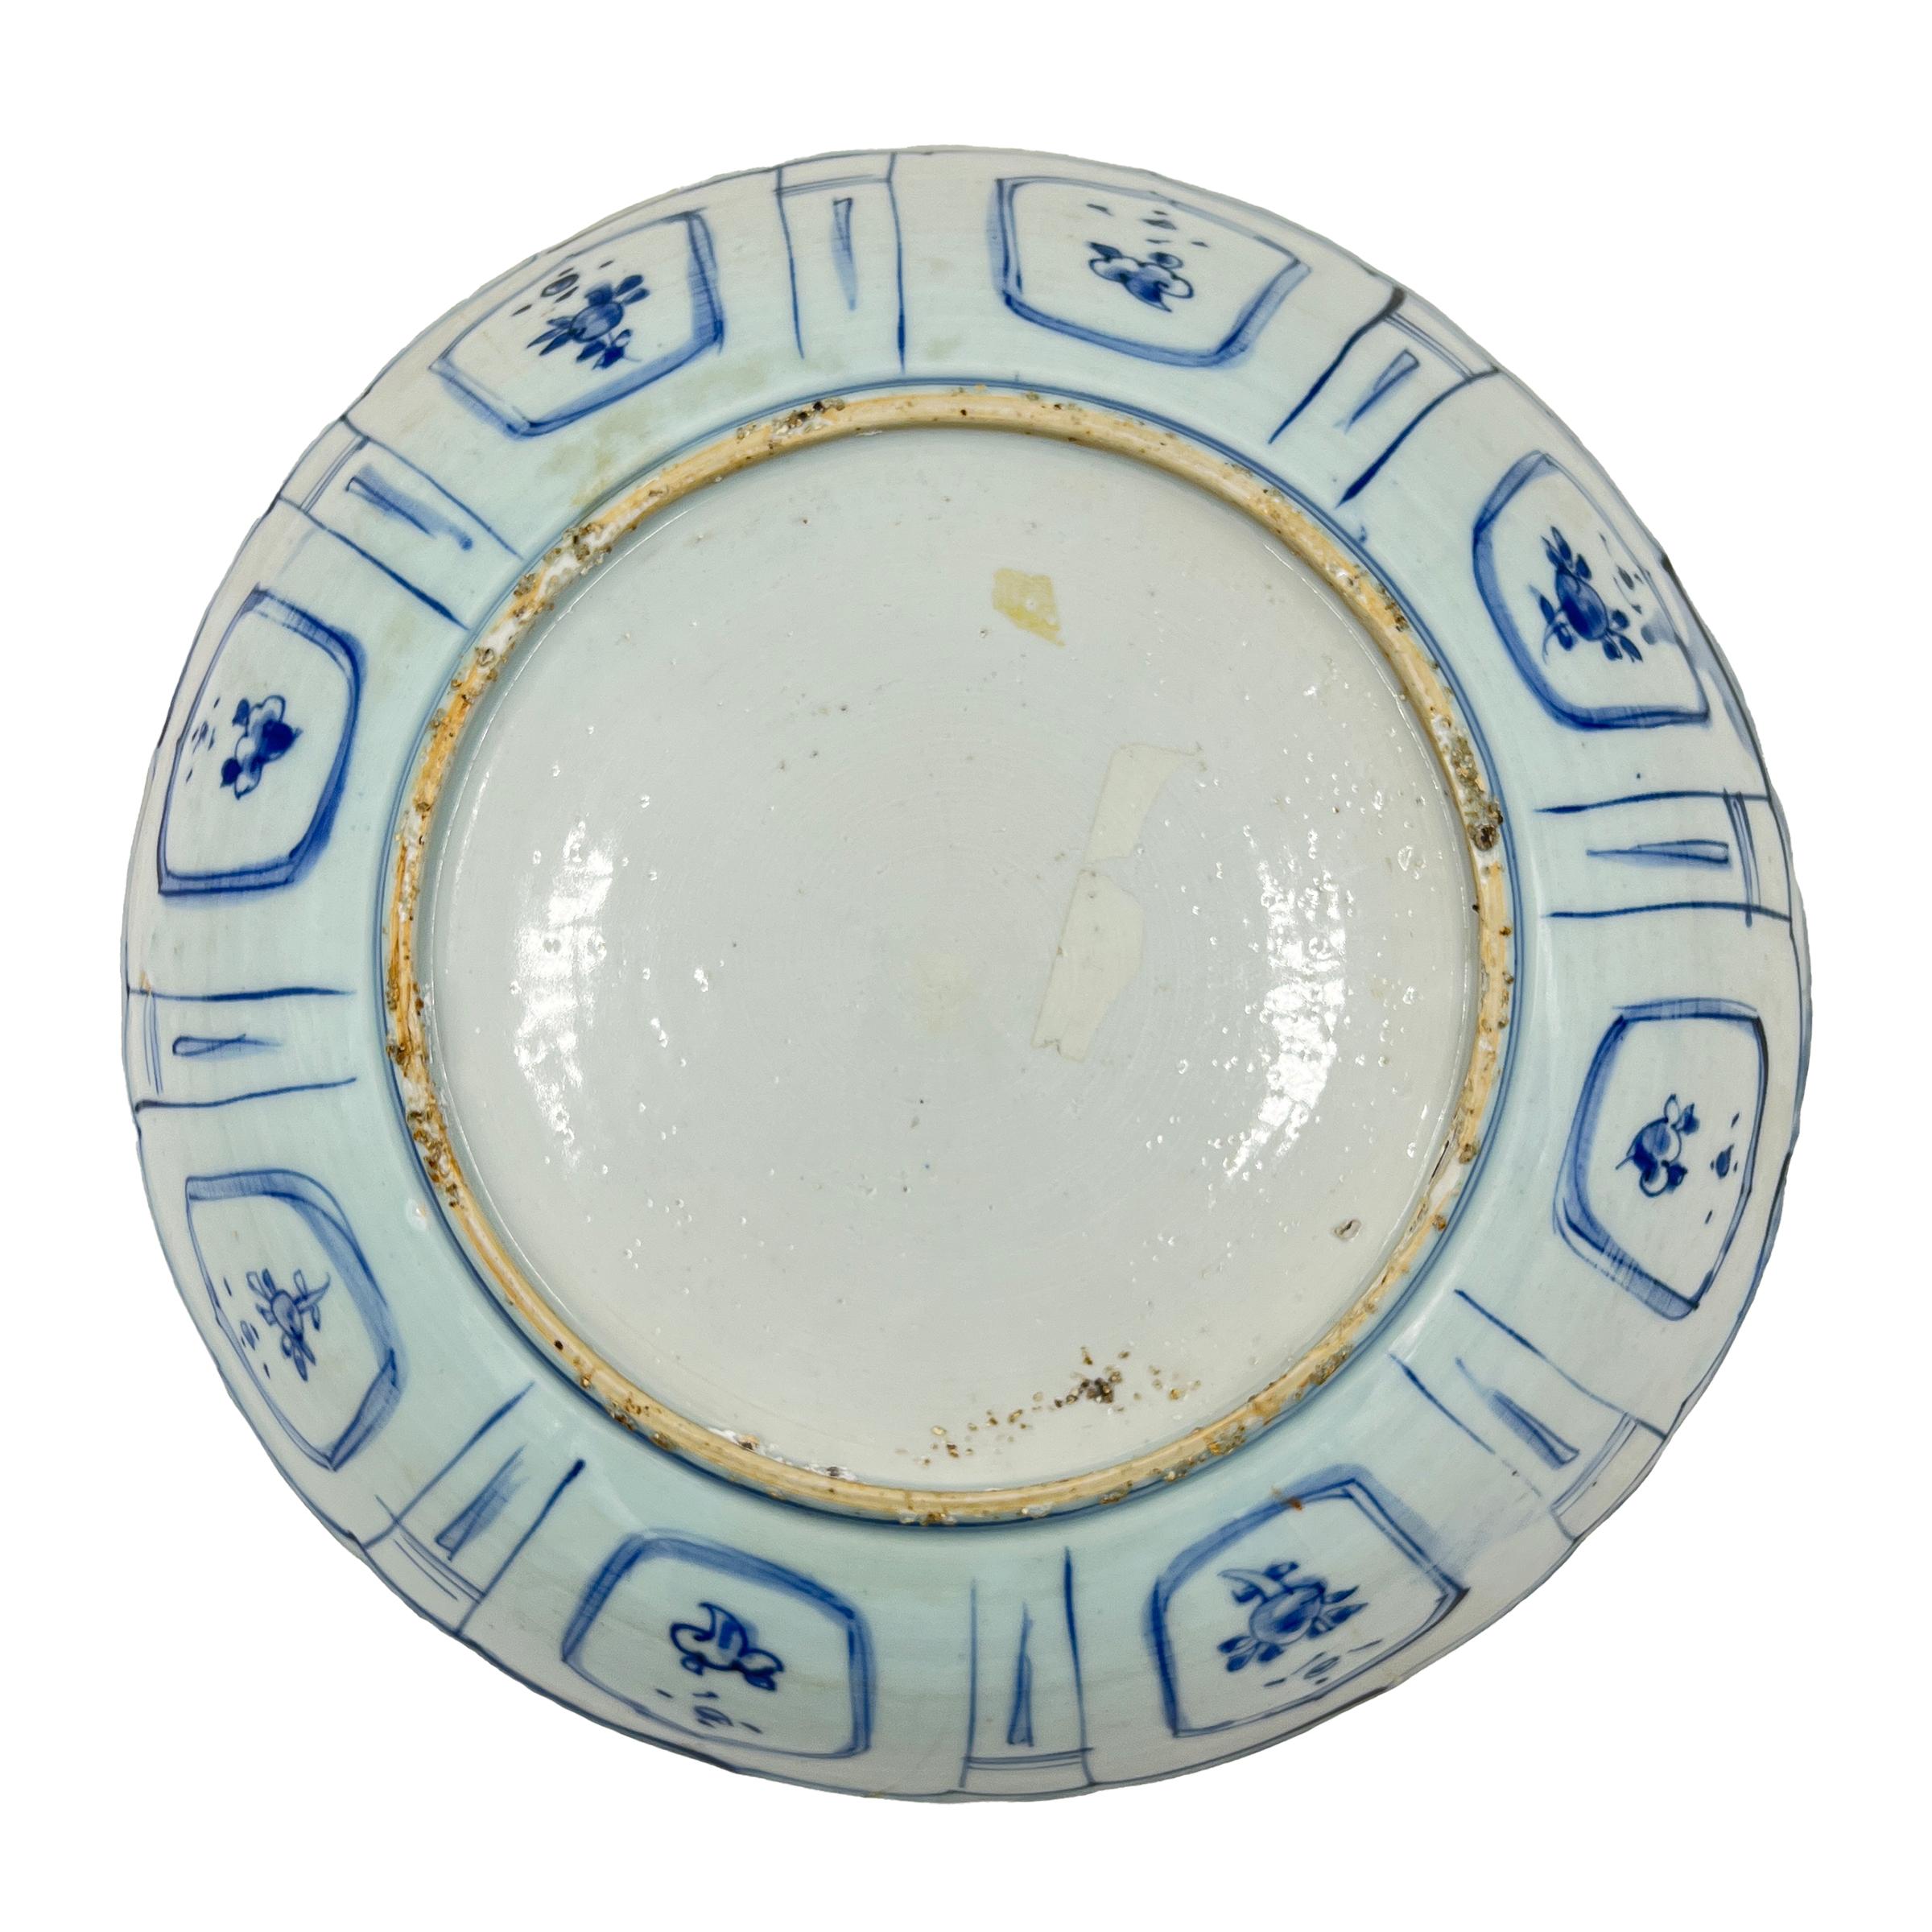 A fine blue and white kraak porcelain charger, The central cartouche with scalloped edge containing a scene of a bird surrounded by flowers and leafs, the border of the charger with eight panels containing birds and flowers separated by narrow